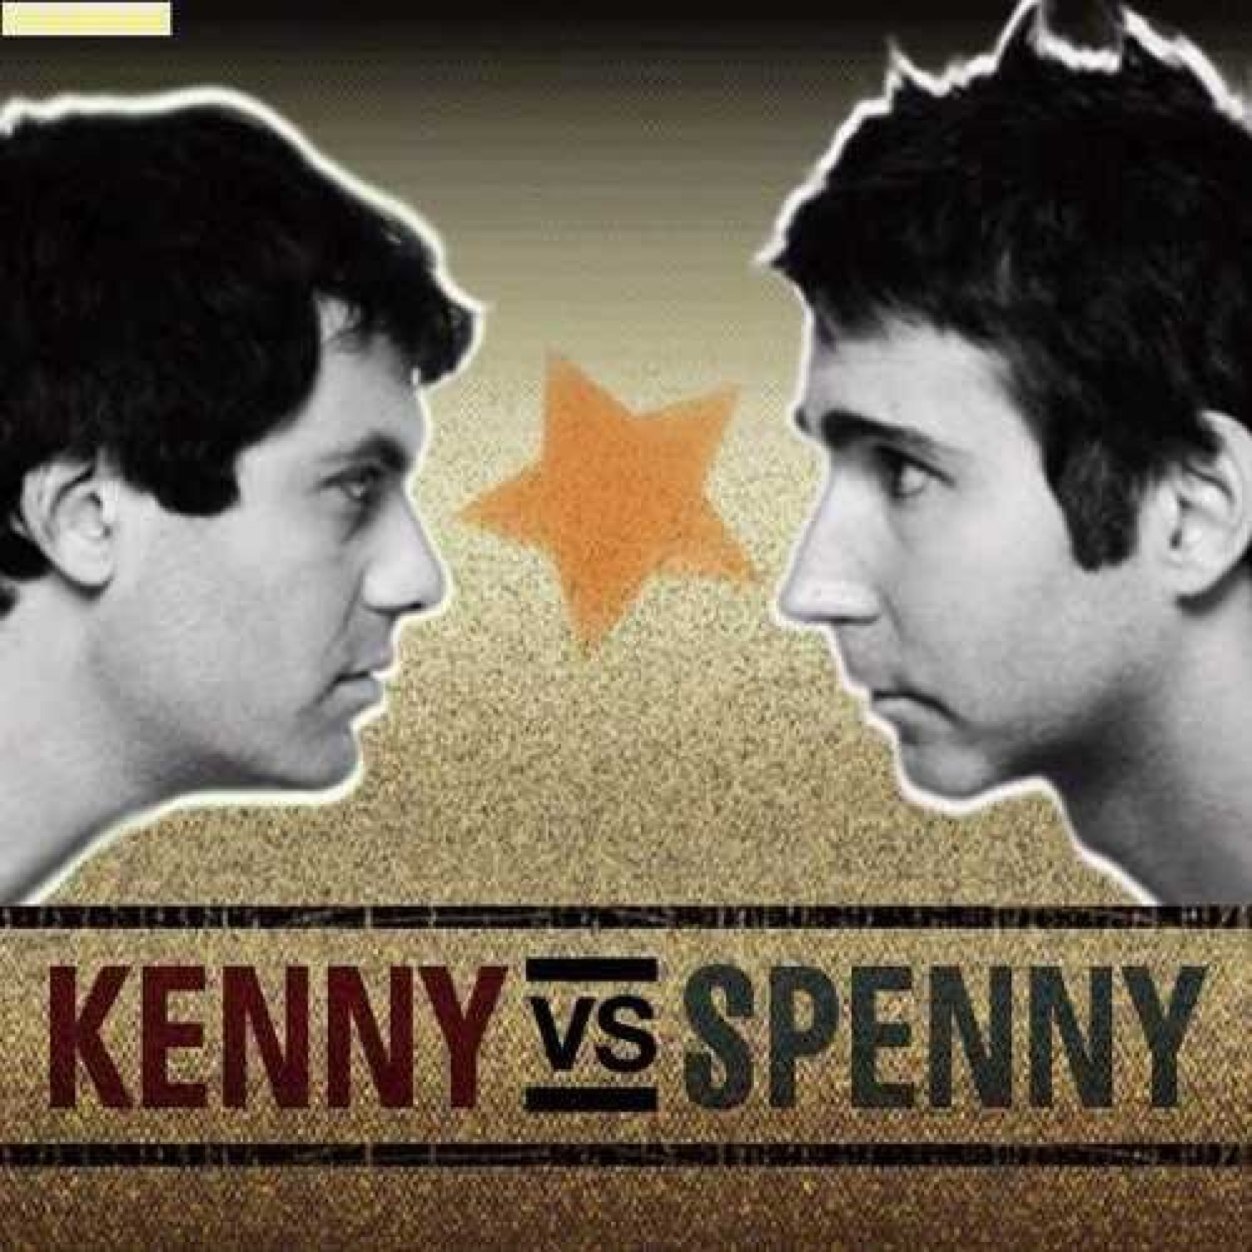 Honeslty, what is this world without KennyVsSpenny? Nothing! This world is nothing. Use this hashtag to bring kenny vs spenny back. #BringBackKVS